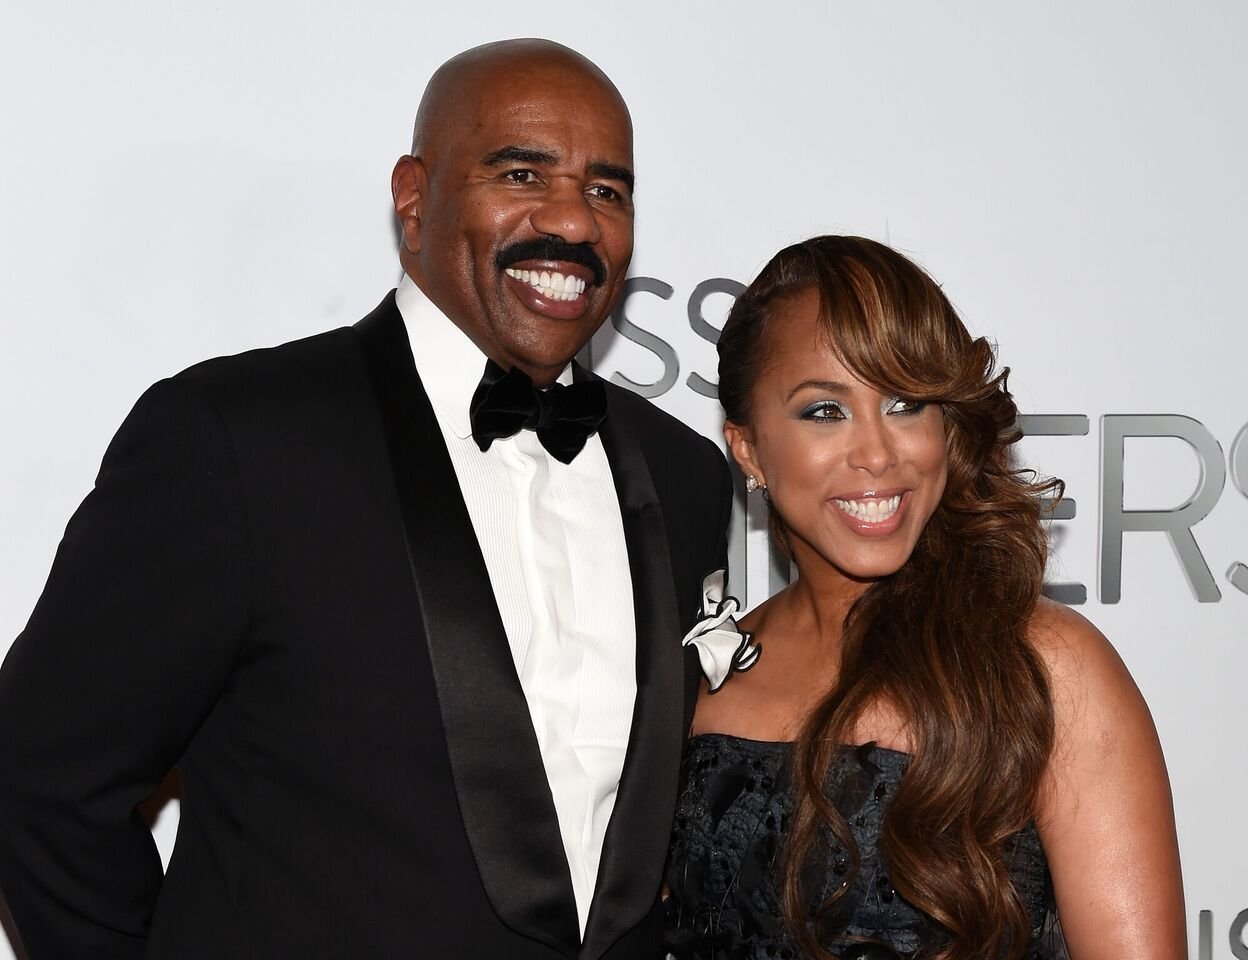 Steve Harvey and his wife Marjorie Harvey attend the 2015 Miss Universe Pageant at Planet Hollywood Resort & Casino on December 20, 2015. | Photo: Getty Images